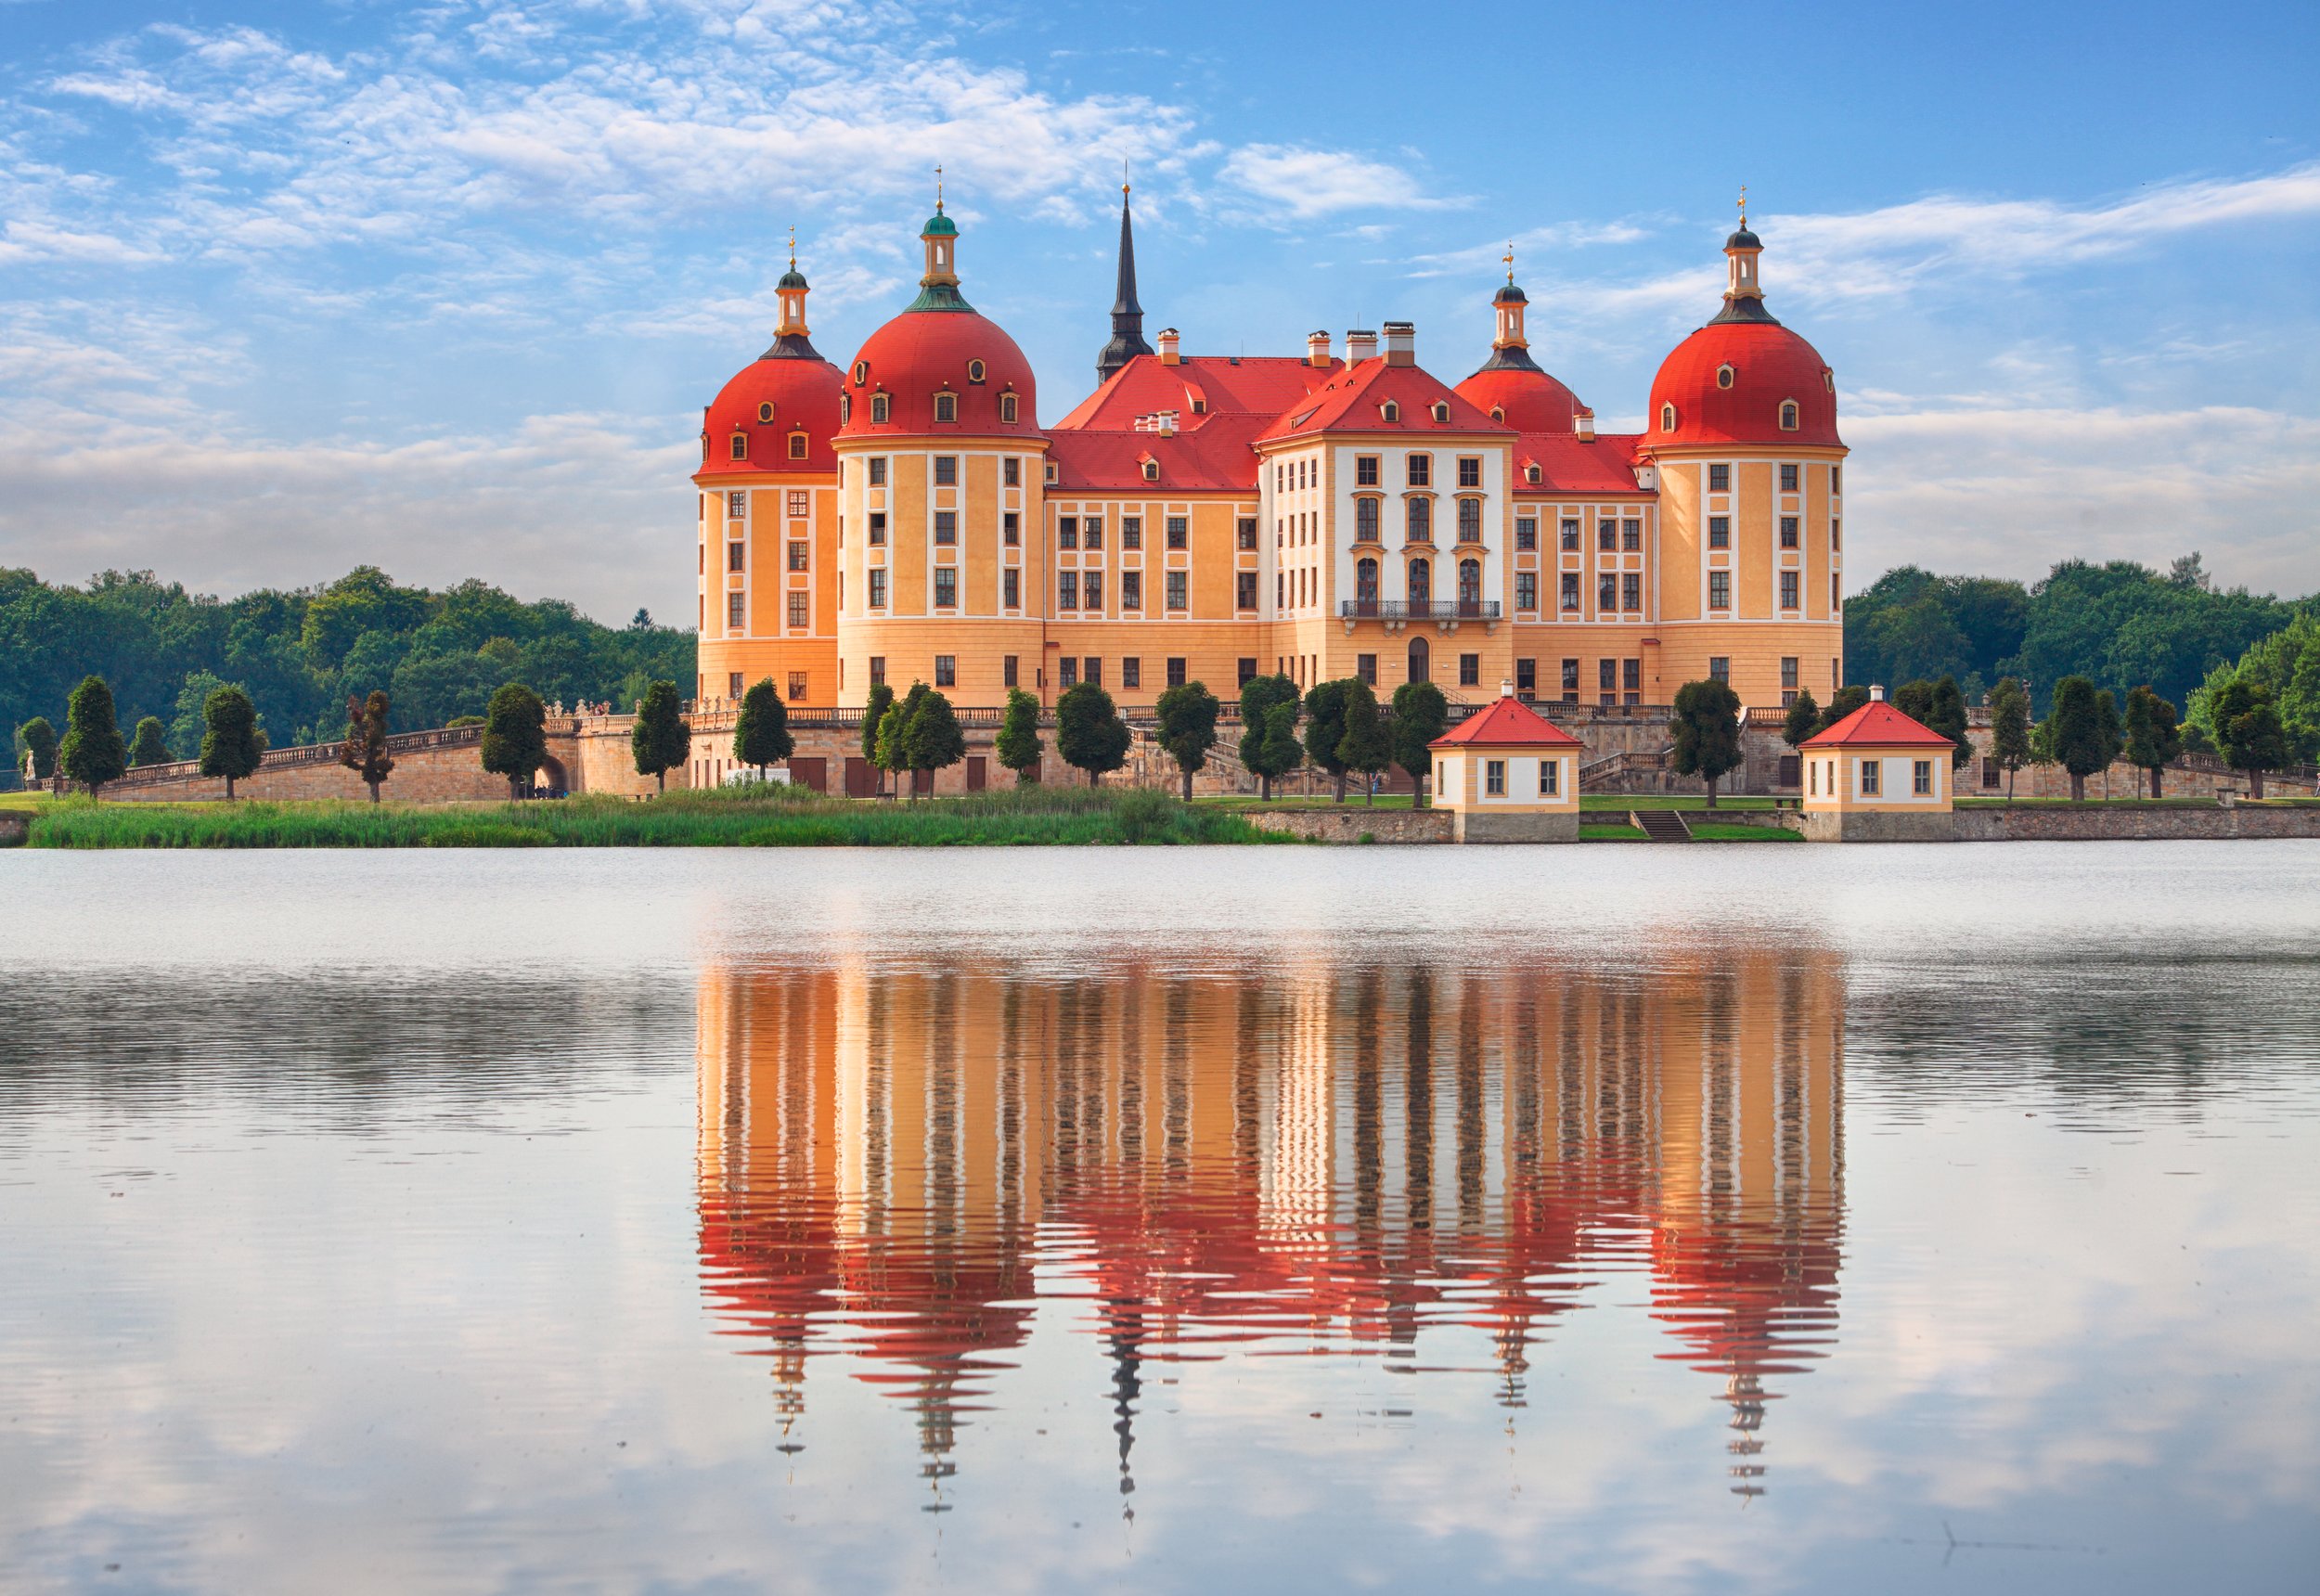 Situated on its own private island, Moritzburg Castle appears to rise out of the water like something from a fairytale.